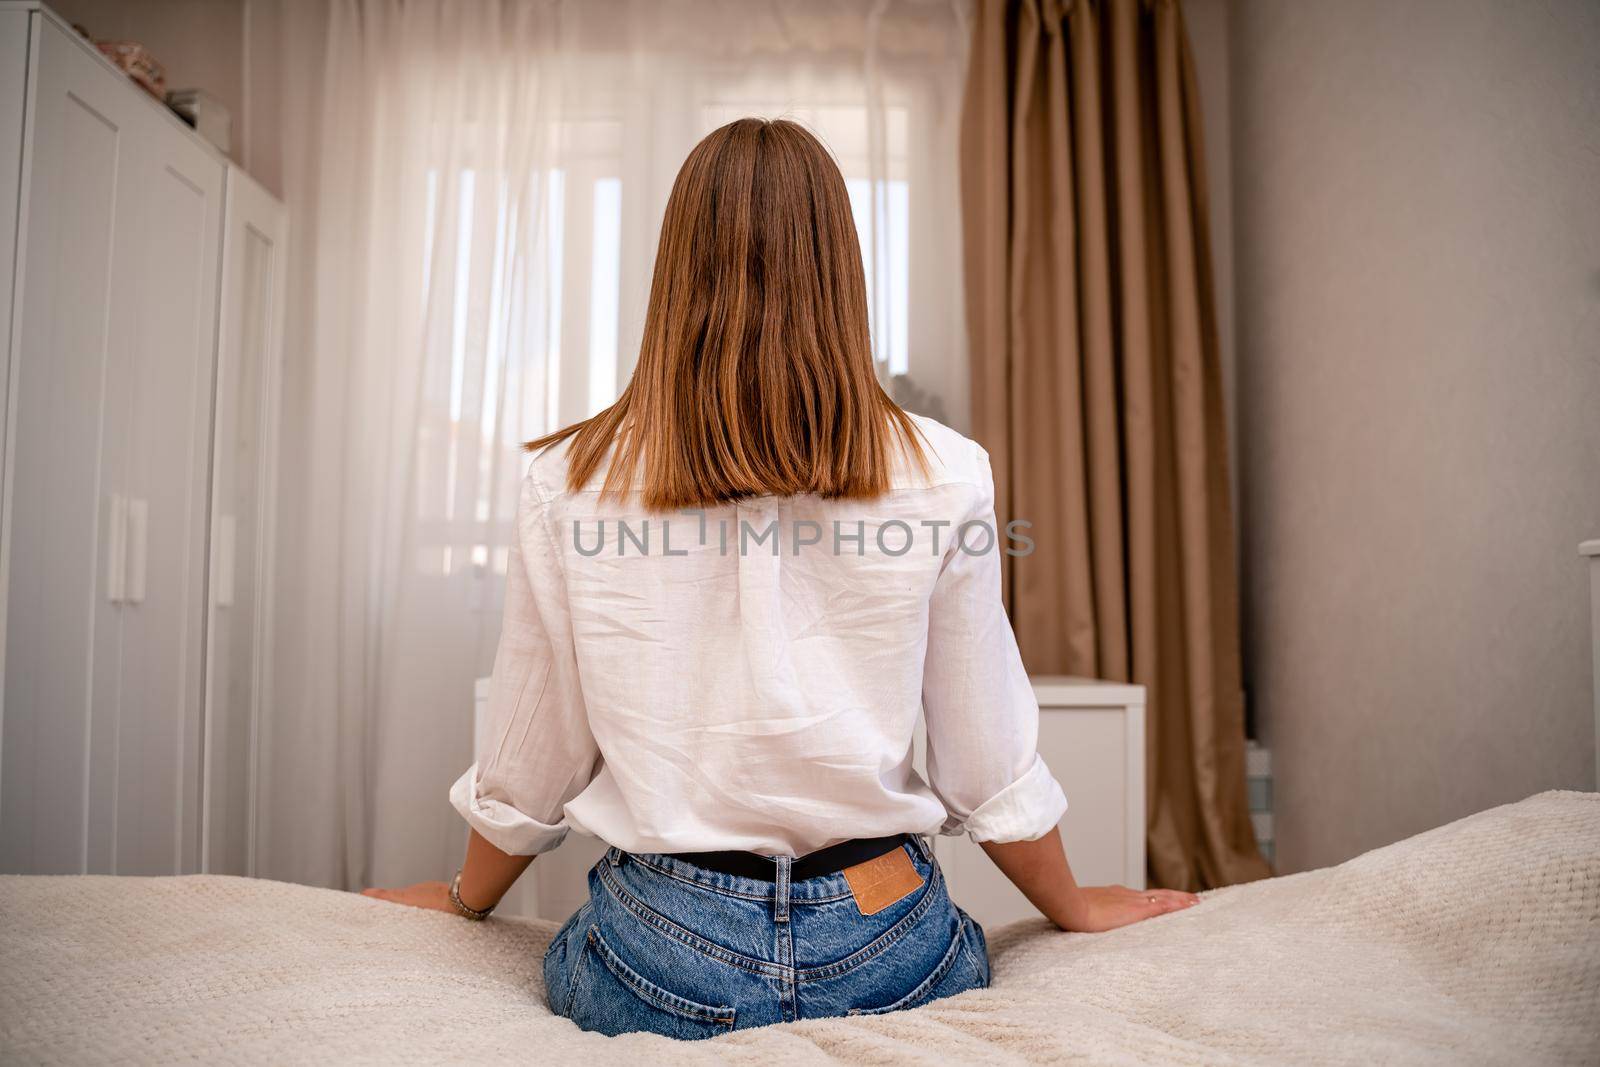 A young woman in a white shirt and jeans sits on the bed with her back against the background of the room and the window. Home furnishings